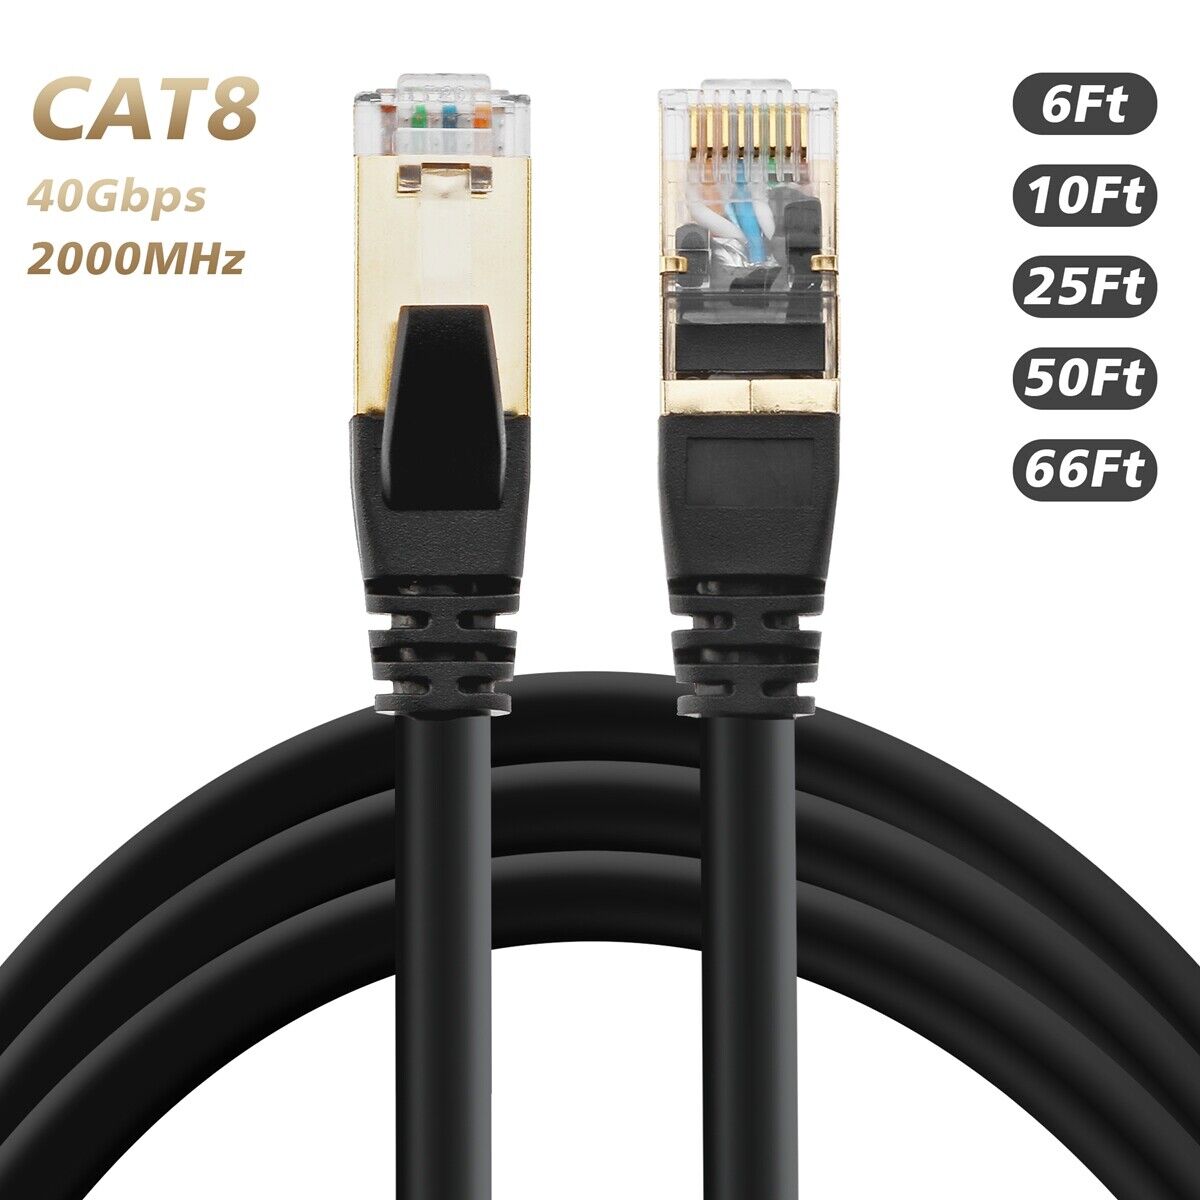 New CAT 8 Ethernet Cable 40Gbps 2000Mhz High Speed Gigabit SSTP LAN Network Lot